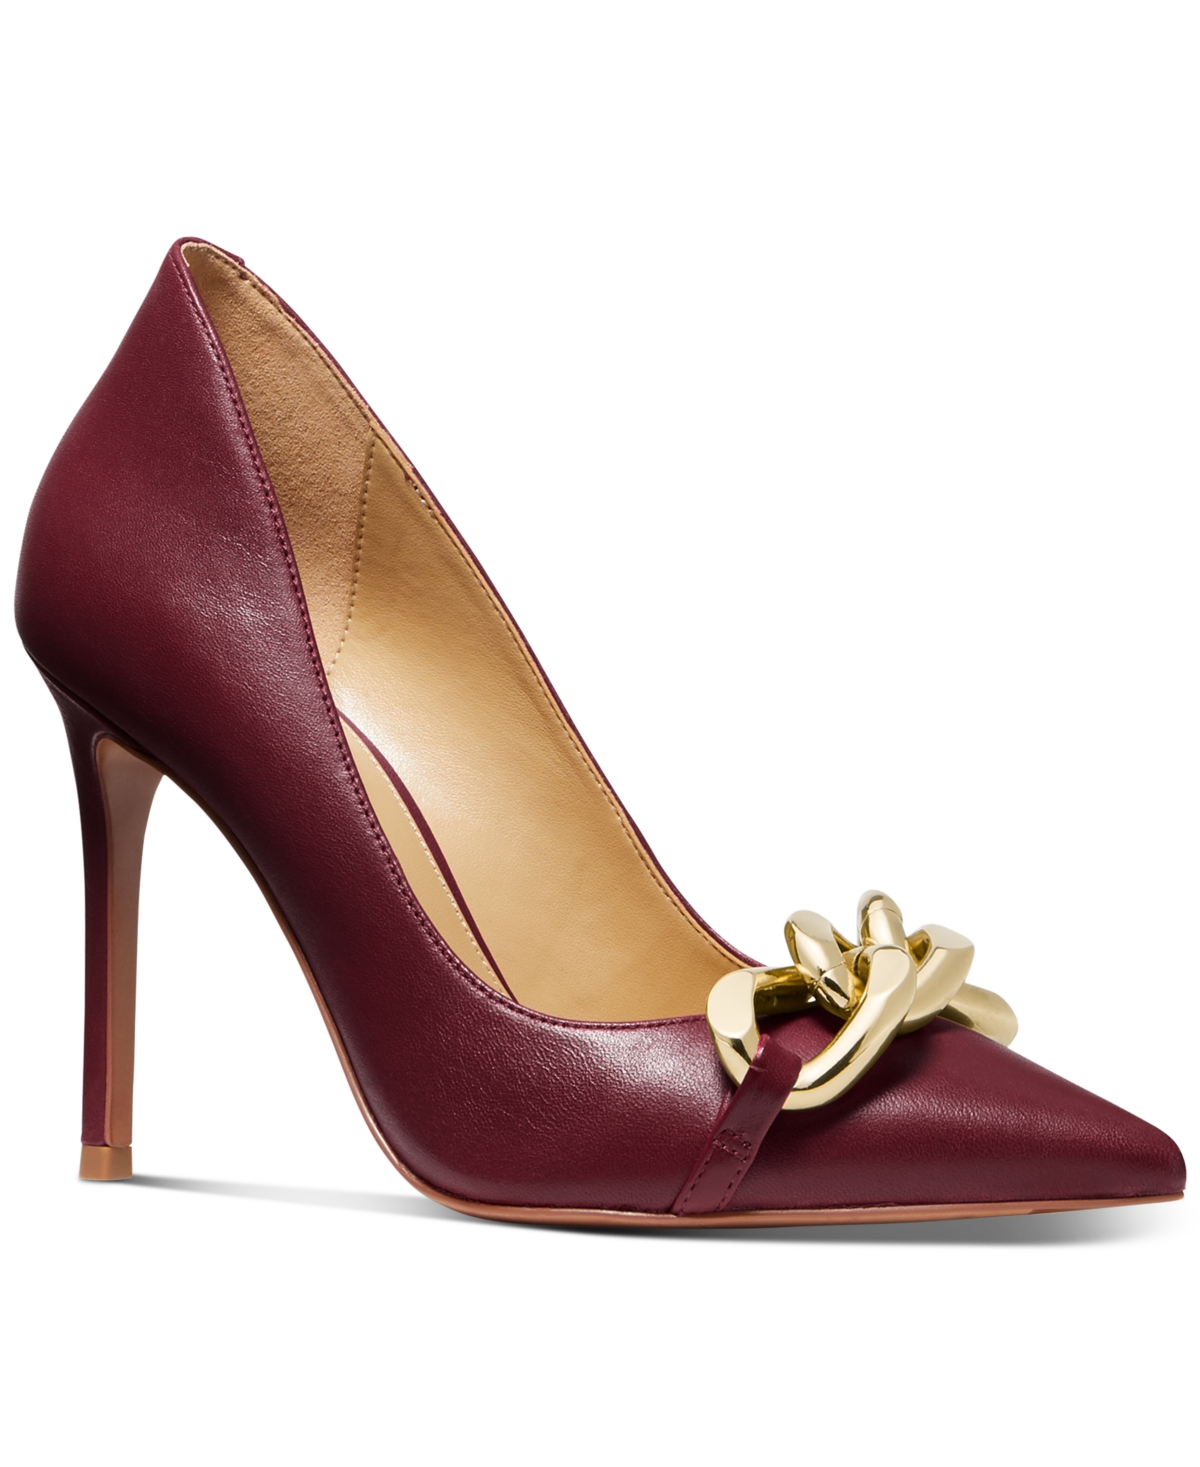 UPC 195512620928 product image for Michael Michael Kors Women's Scarlett Pointed-Toe Chain Pumps Women's Shoes | upcitemdb.com